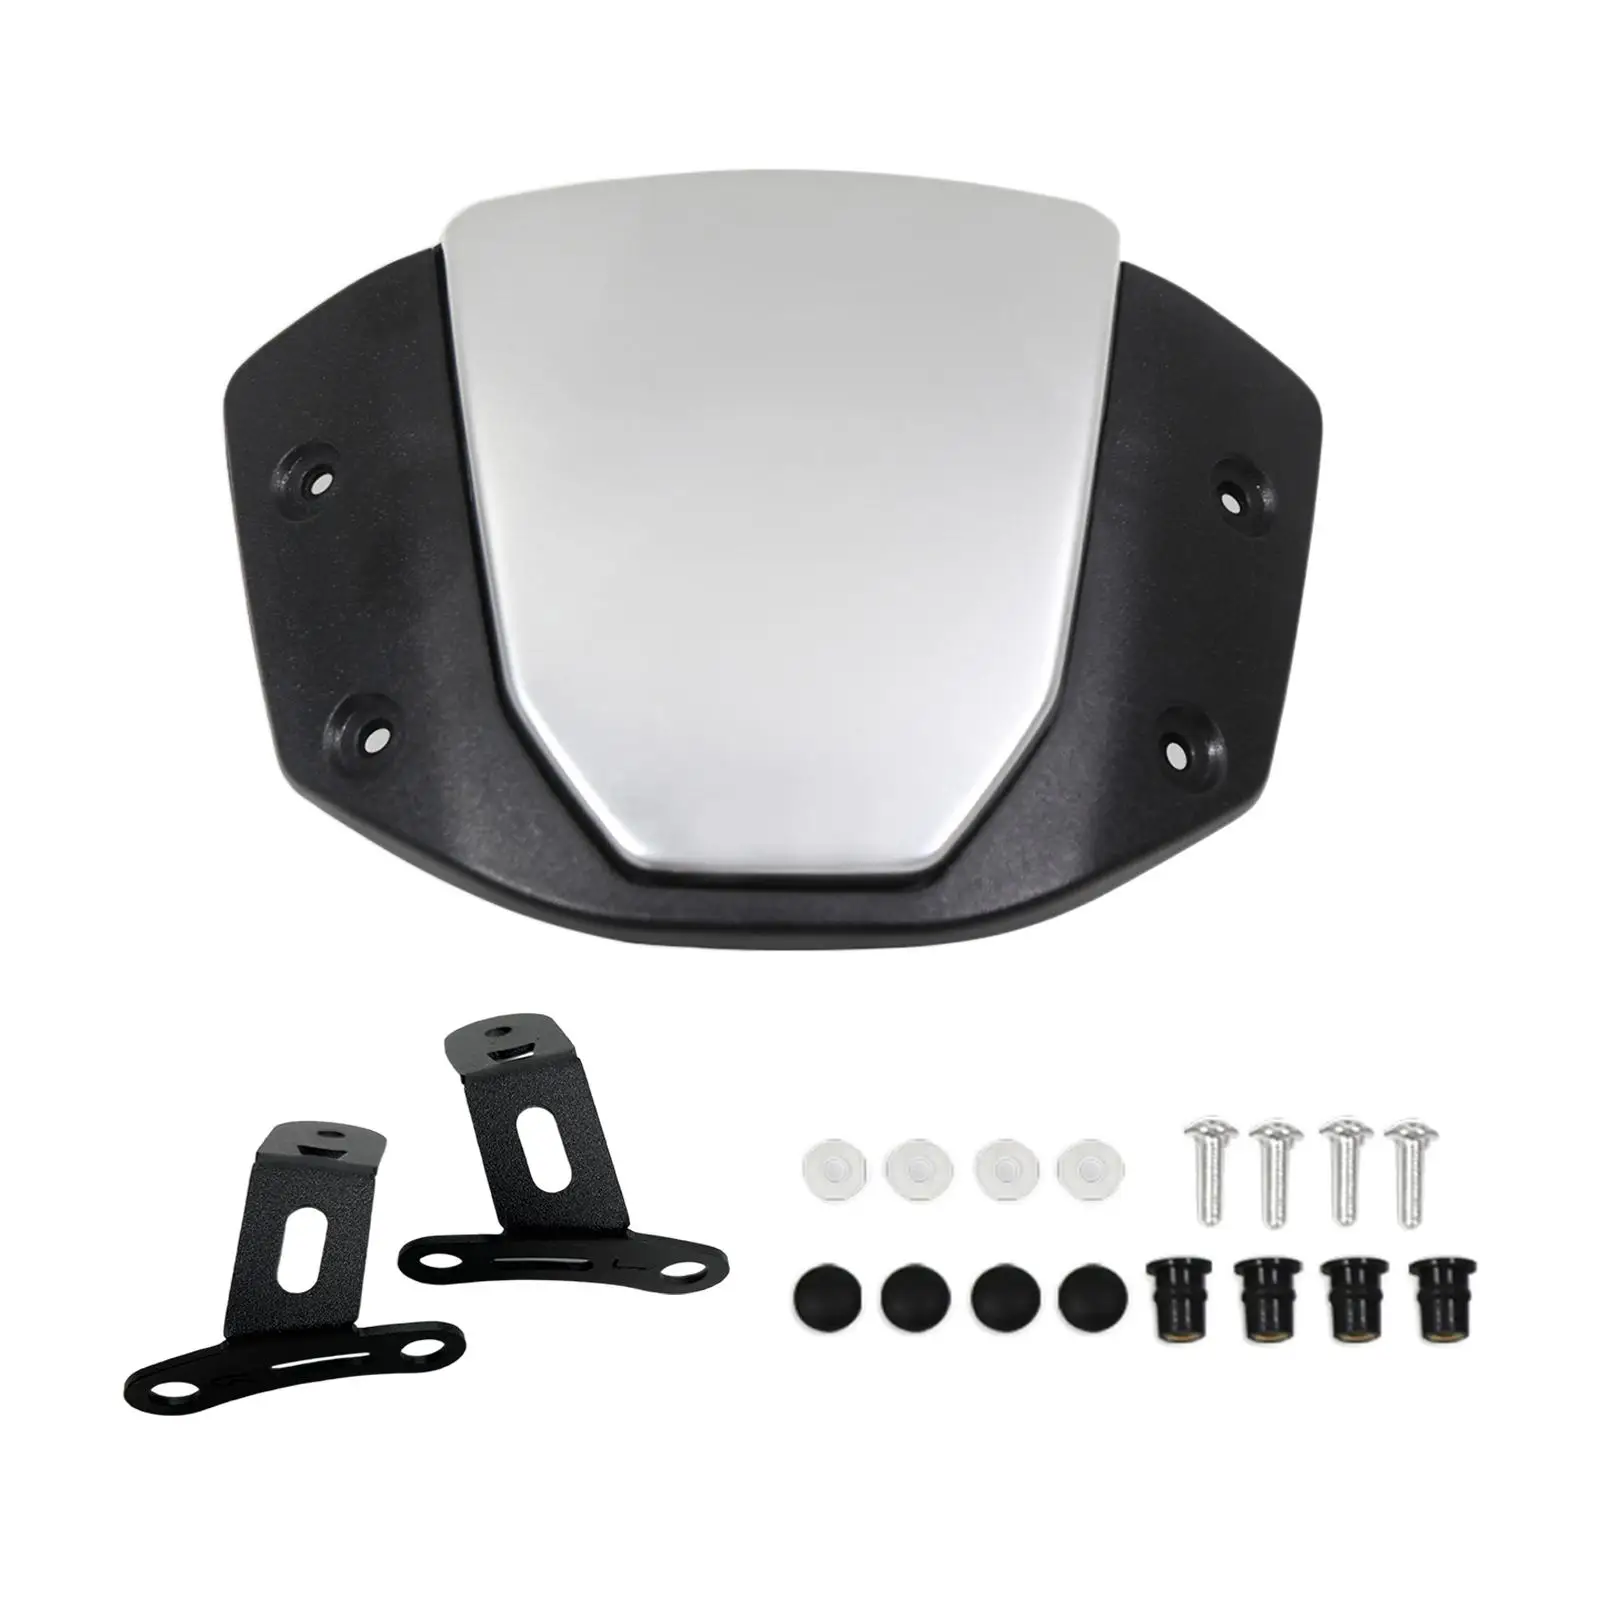 Front Screen Windshield Windscreen Protector for CB650R Replaces